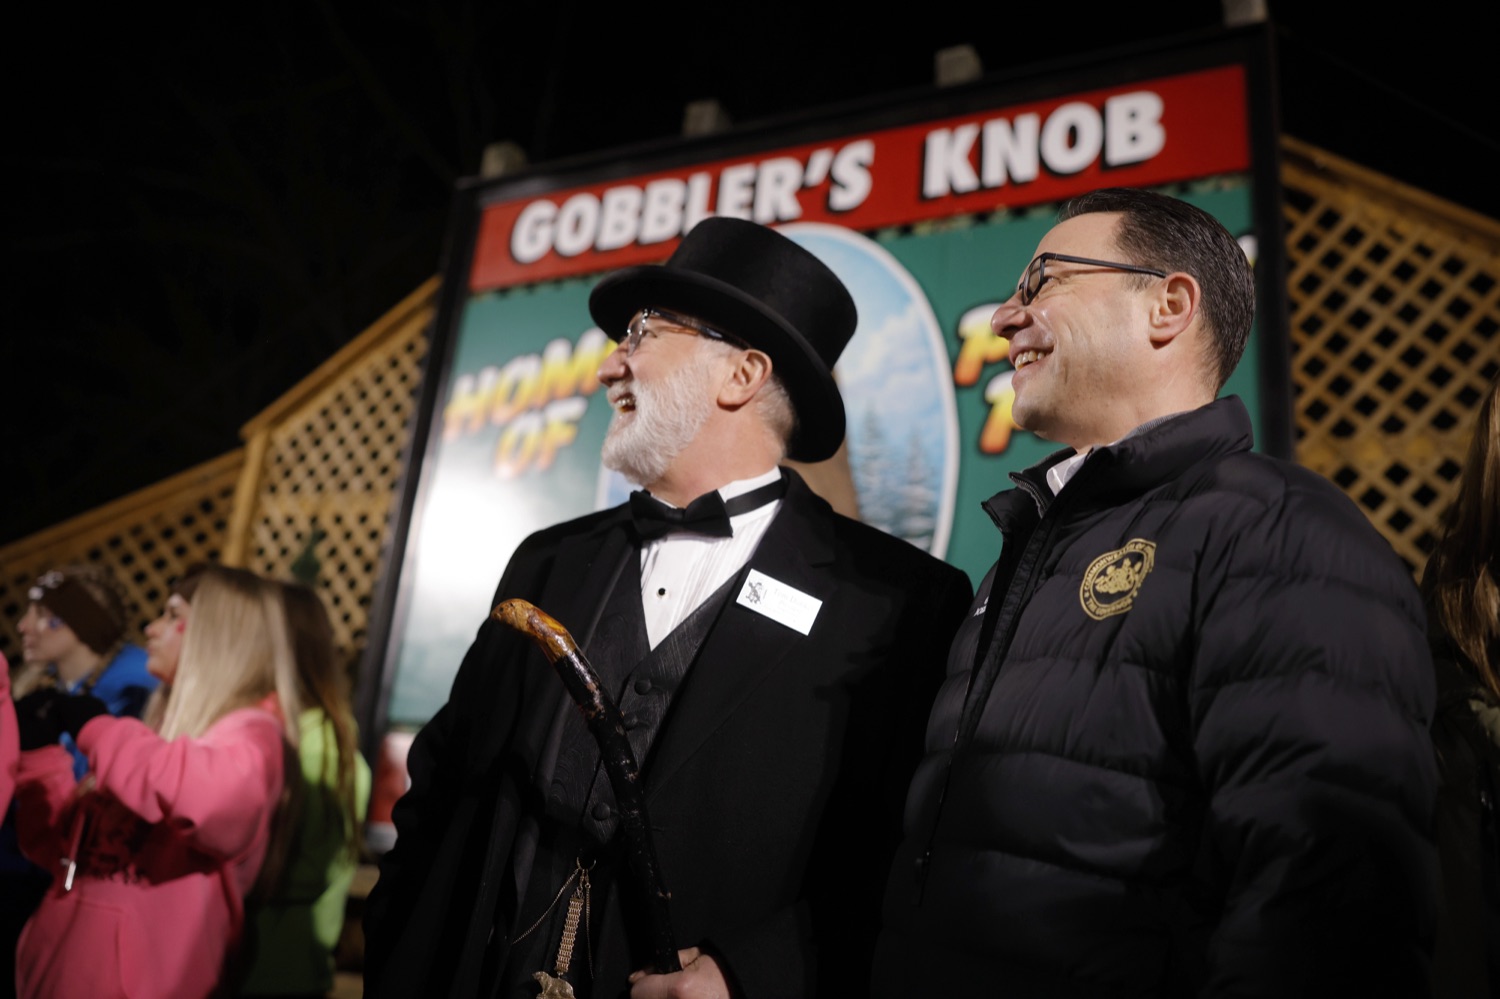 Pennsylvanias very own world-famous groundhog Punxsutawney Phil predicted an early spring after not seeing his shadow this morning at Gobblers Knob in Punxsutawney  marking the 21st time Phil has not seen his shadow during the 138-year-old tradition. Governor Josh Shapiro and Department of Community and Economic Development (DCED) Secretary Rick Siger were in Punxsutawney this morning, for the second year in a row, as Phil made his annual prediction. The Governor and his Administration understand the importance of the travel and tourism industry, which serves as a powerful economic engine in every corner of the Commonwealth.  FEBRUARY 02, 2024 - PUNXSUTAWNEY, PA<br><a href="https://filesource.amperwave.net/commonwealthofpa/photo/24181_dced_groundhogday2024_dz_0001.JPG" target="_blank">⇣ Download Photo</a>